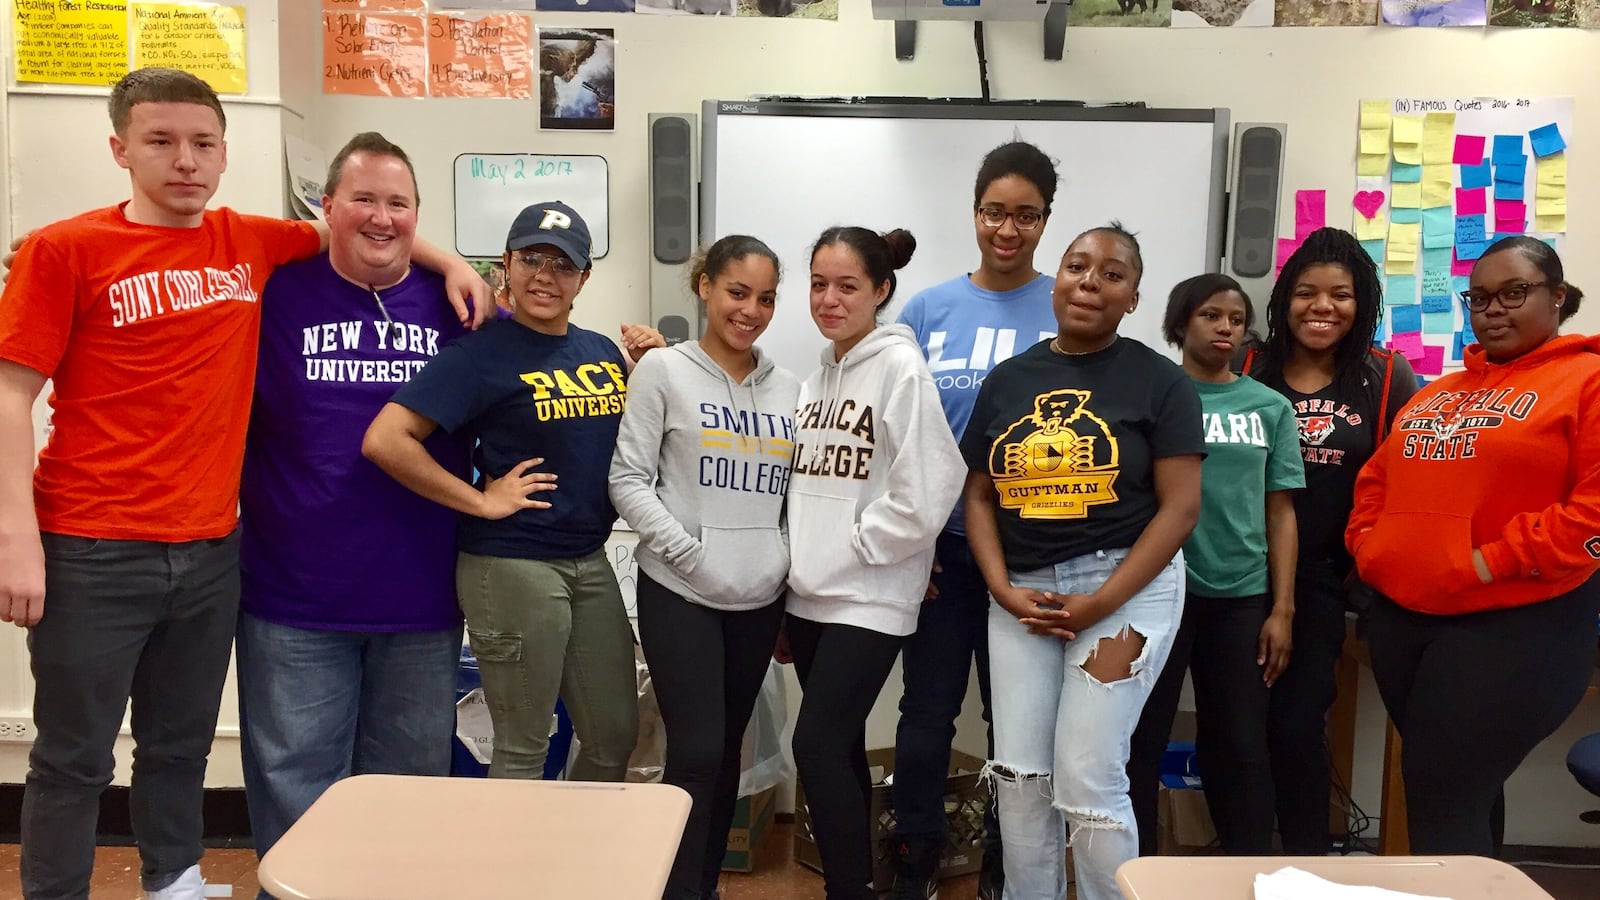 Steven Serling, wearing a New York University shirt, poses with seniors wearing gear to represent the colleges they've committed to attending.